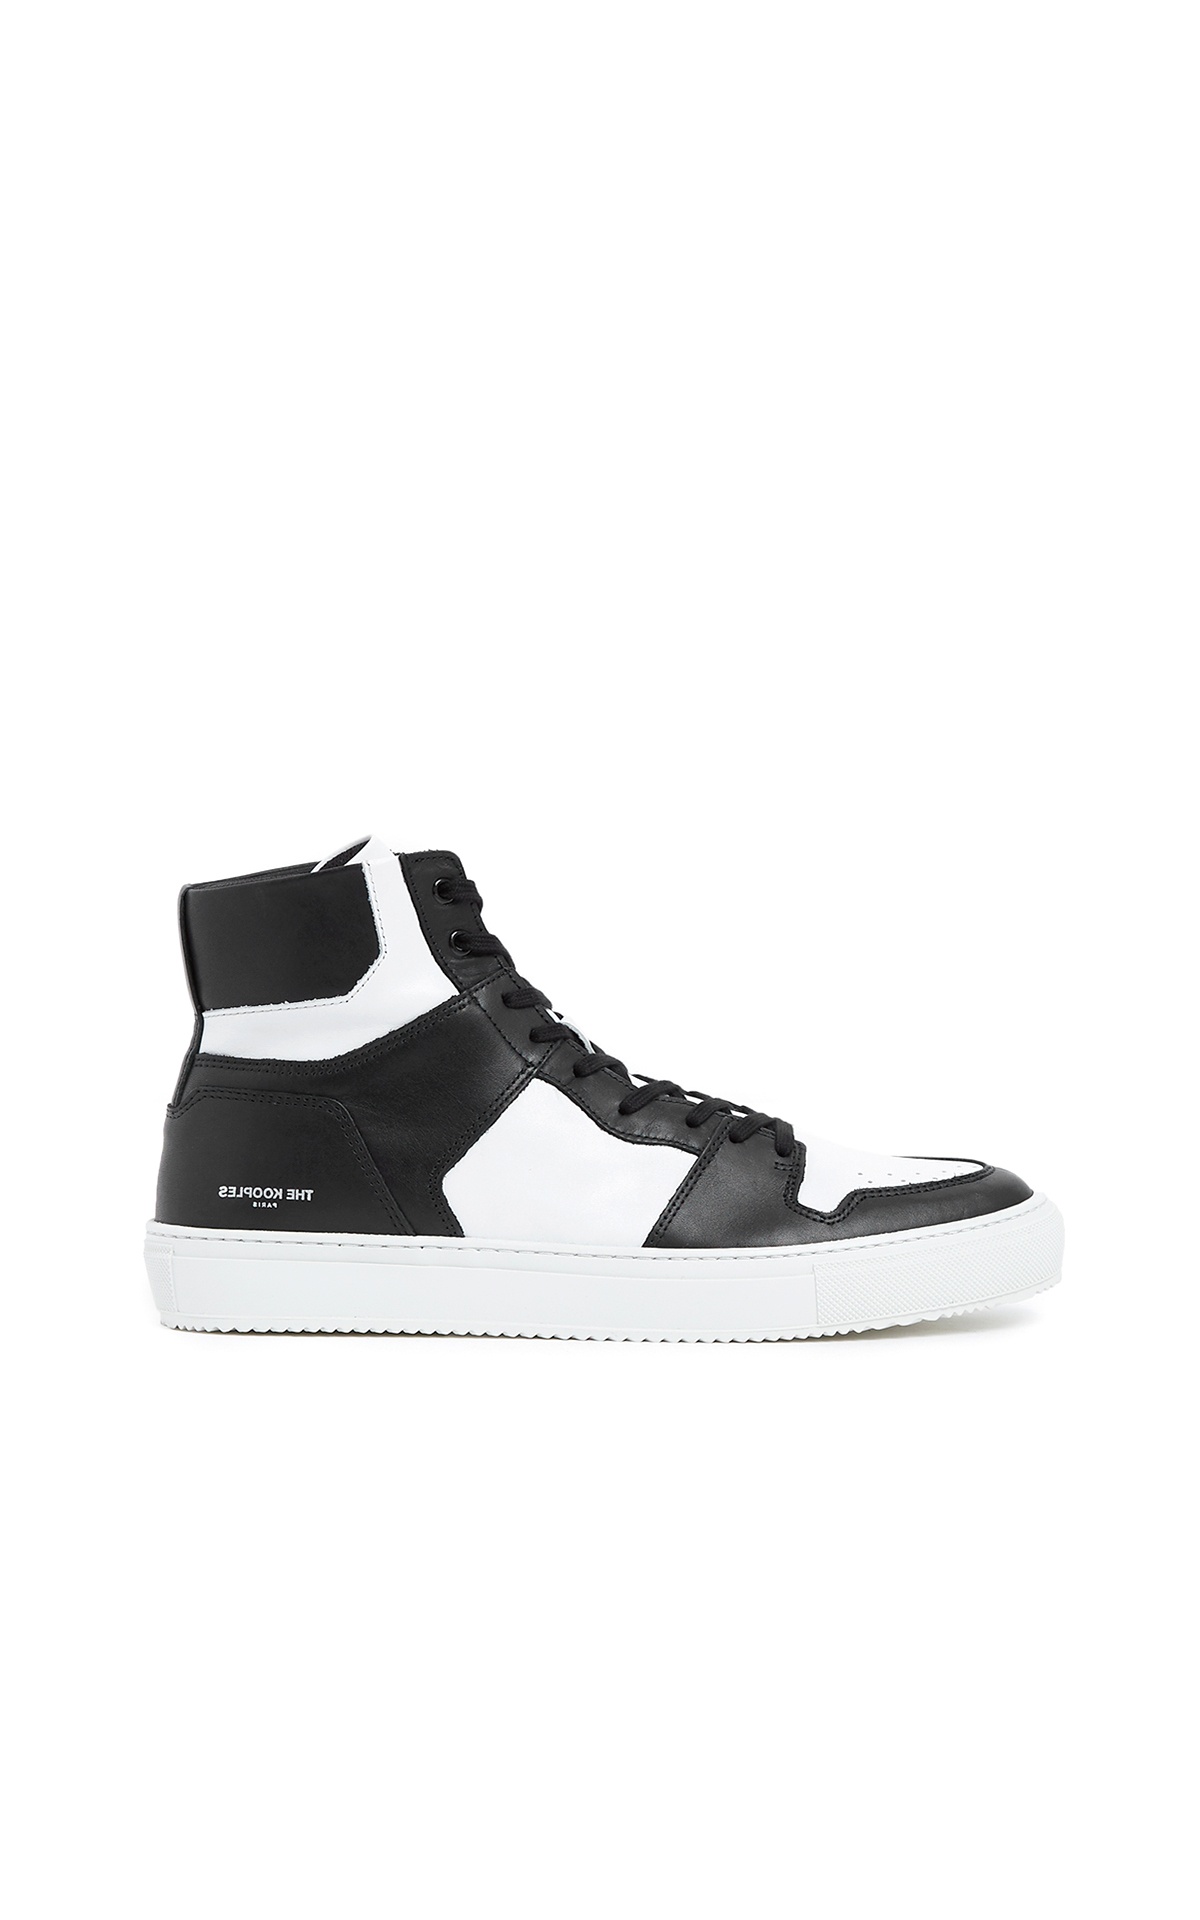 The Kooples black and white high-top sneakers La Vallée Village